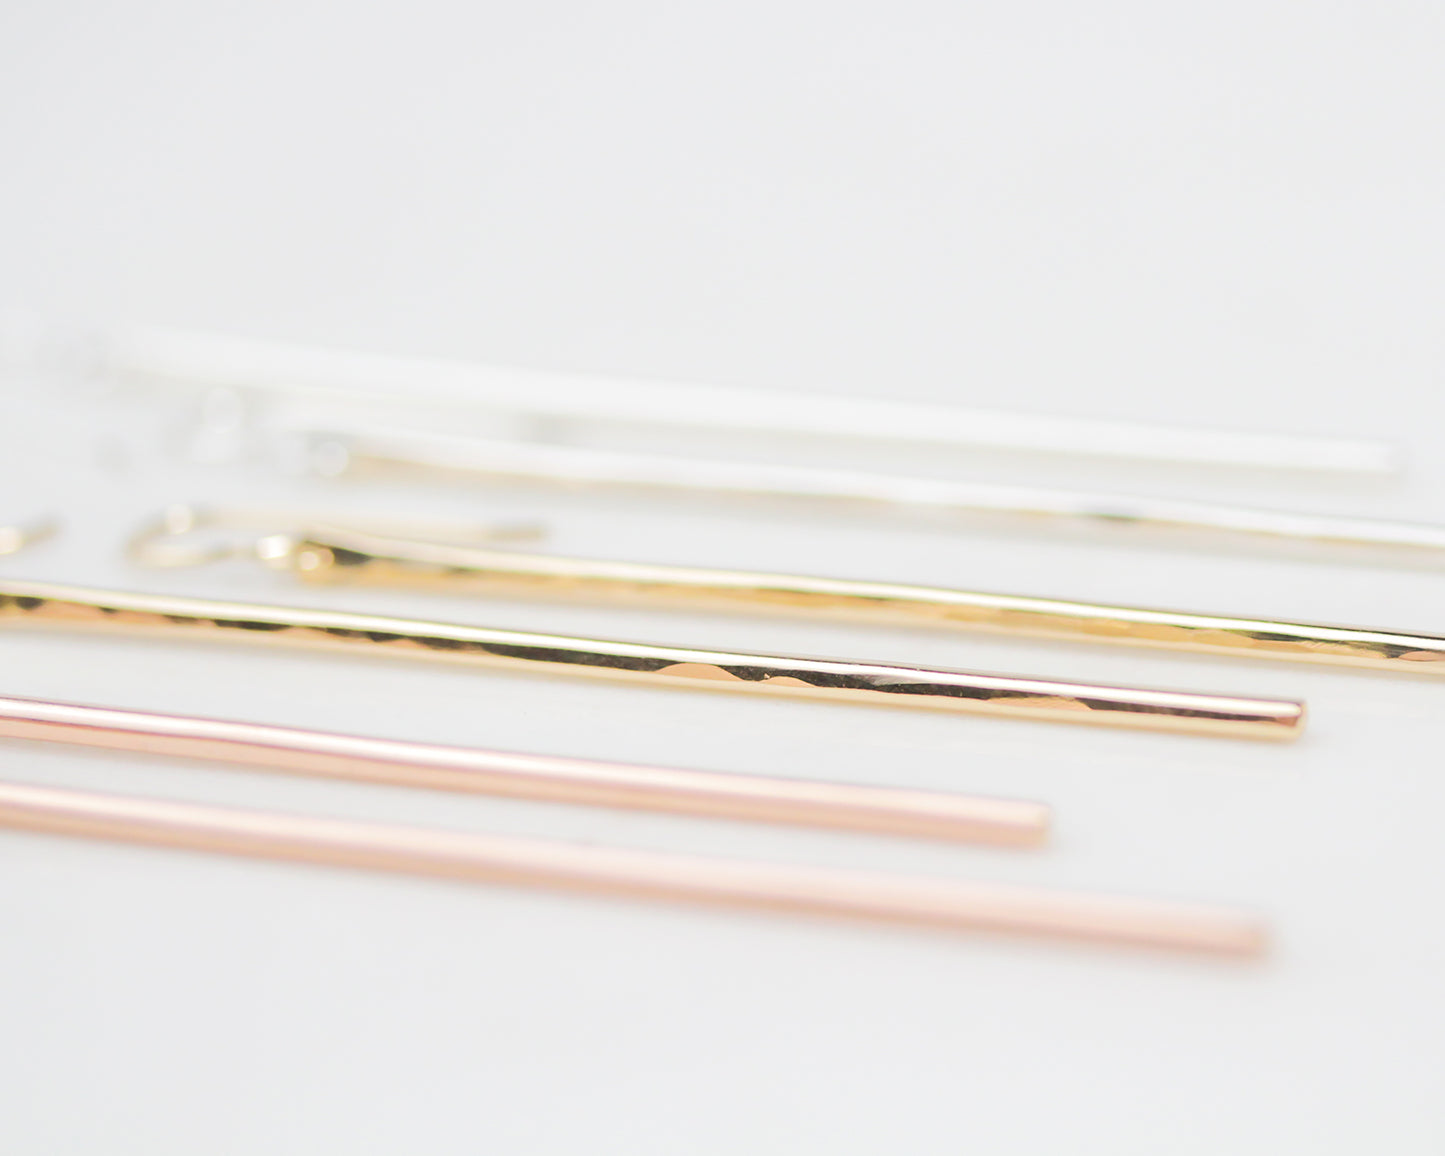 Image shows side view of the long, slender bar earrings showing the lovely hand hammered texture. High quality and fine metal will stand the test of time and not fade or tarnish. Can be worn in the water and daily.